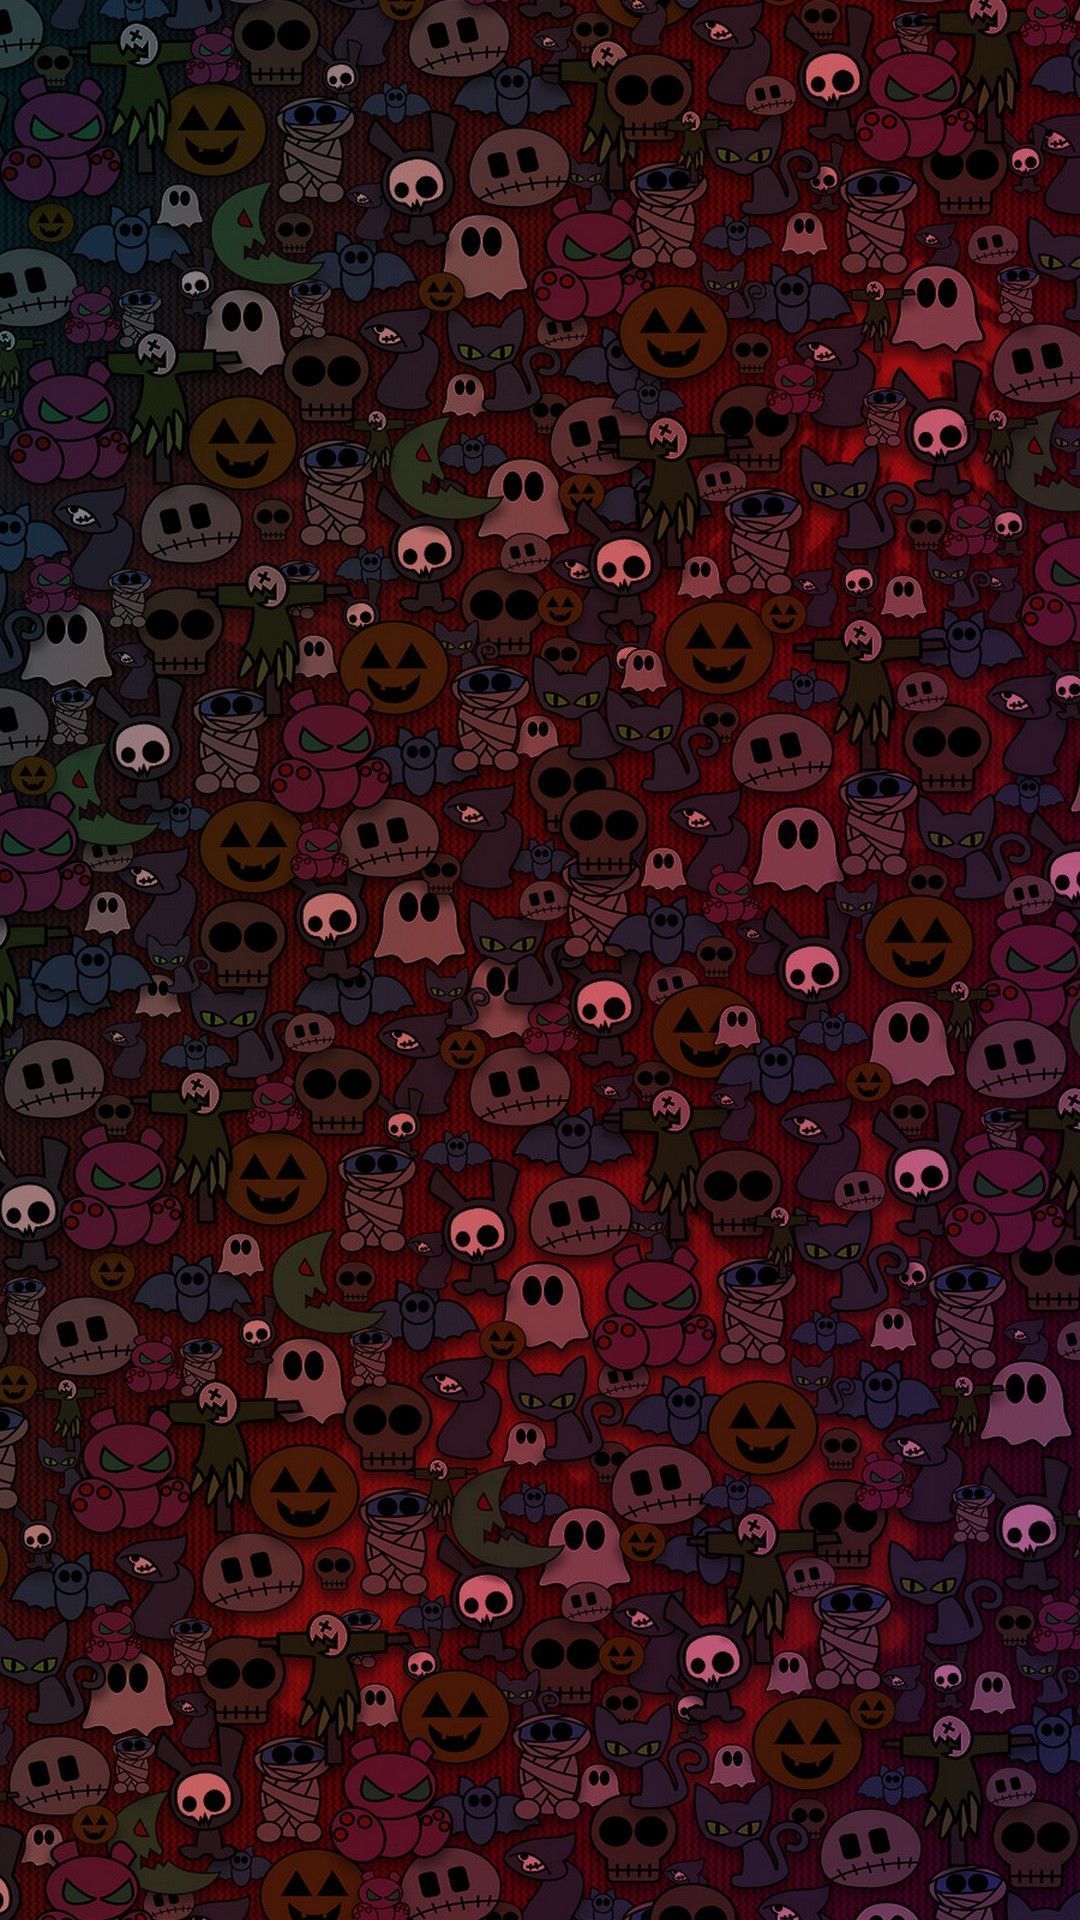 A pattern of many different colored pumpkins - Spooky